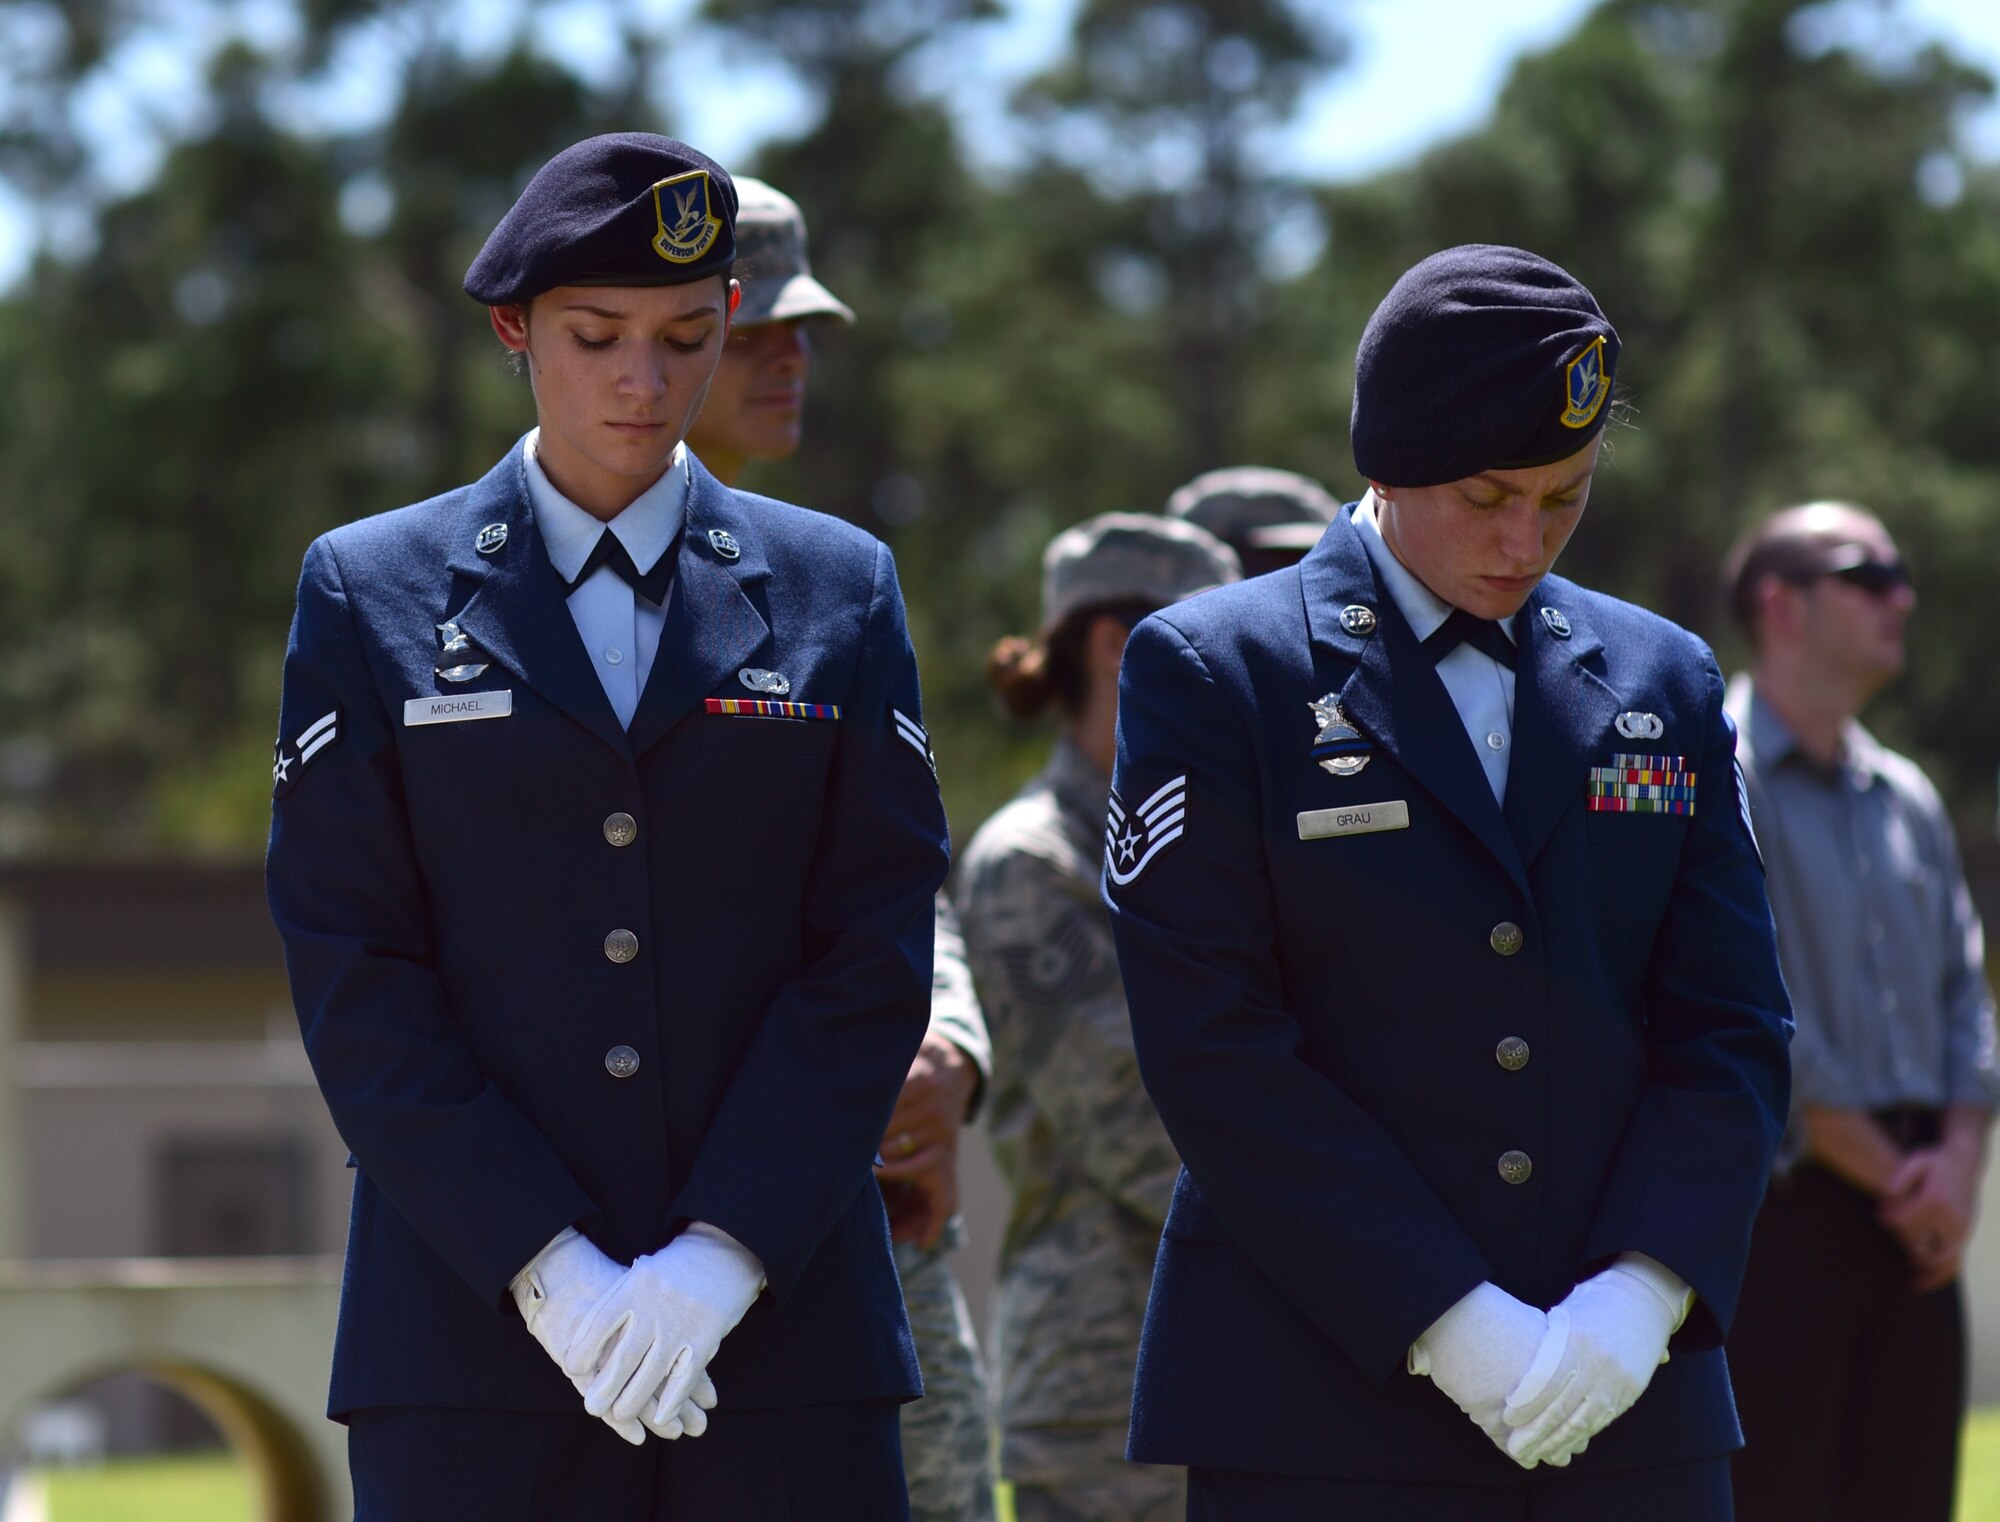 U.S. Air Force Airman 1st Class Arleen Michael, left, and Staff Sgt. Katelyn Grau, right, 325th Security Forces Squadron Airmen, show reverence during a military working dog (MWD) memorial service at Tyndall Air Force Base, Fla., Sept. 7, 2018. Jack, a Belgian Malinois, was an explosives and patrol dog who shared a special bond with his handlers. MWDs are afforded military customs and courtesies. (U.S. Air Force photo by Senior Airman Isaiah J. Soliz)